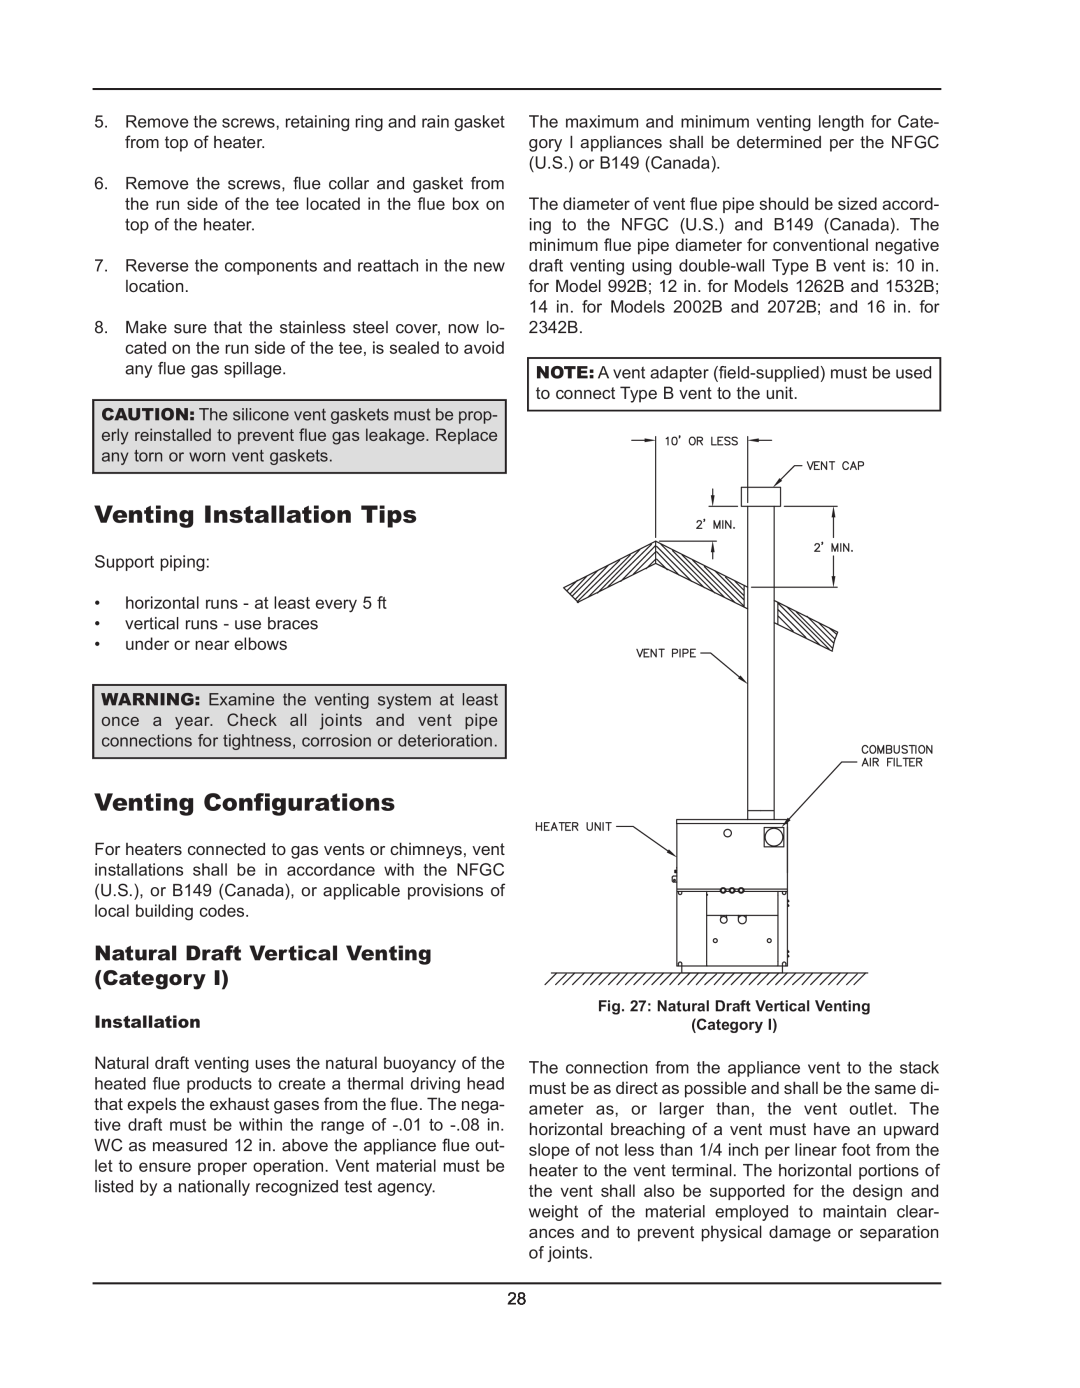 Raypak 992B manual Venting Installation Tips, Venting Configurations, Natural Draft Vertical Venting Category 